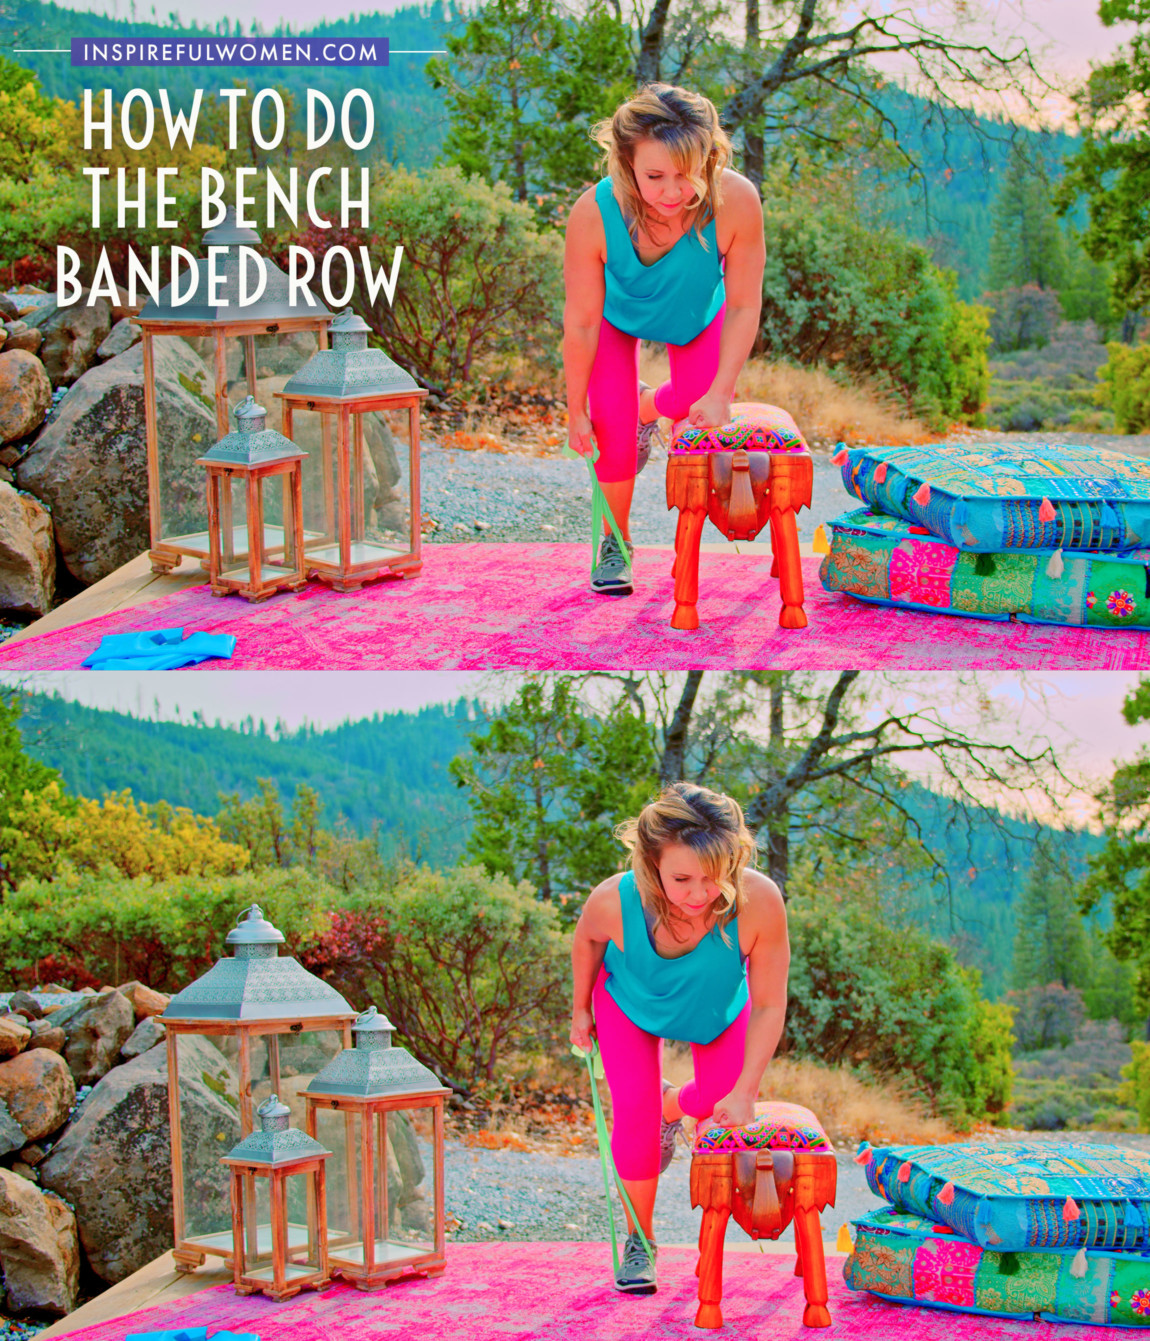 how-to-do-single-arm-kneeling-banded-row-exercise-tutorial-female-over-40